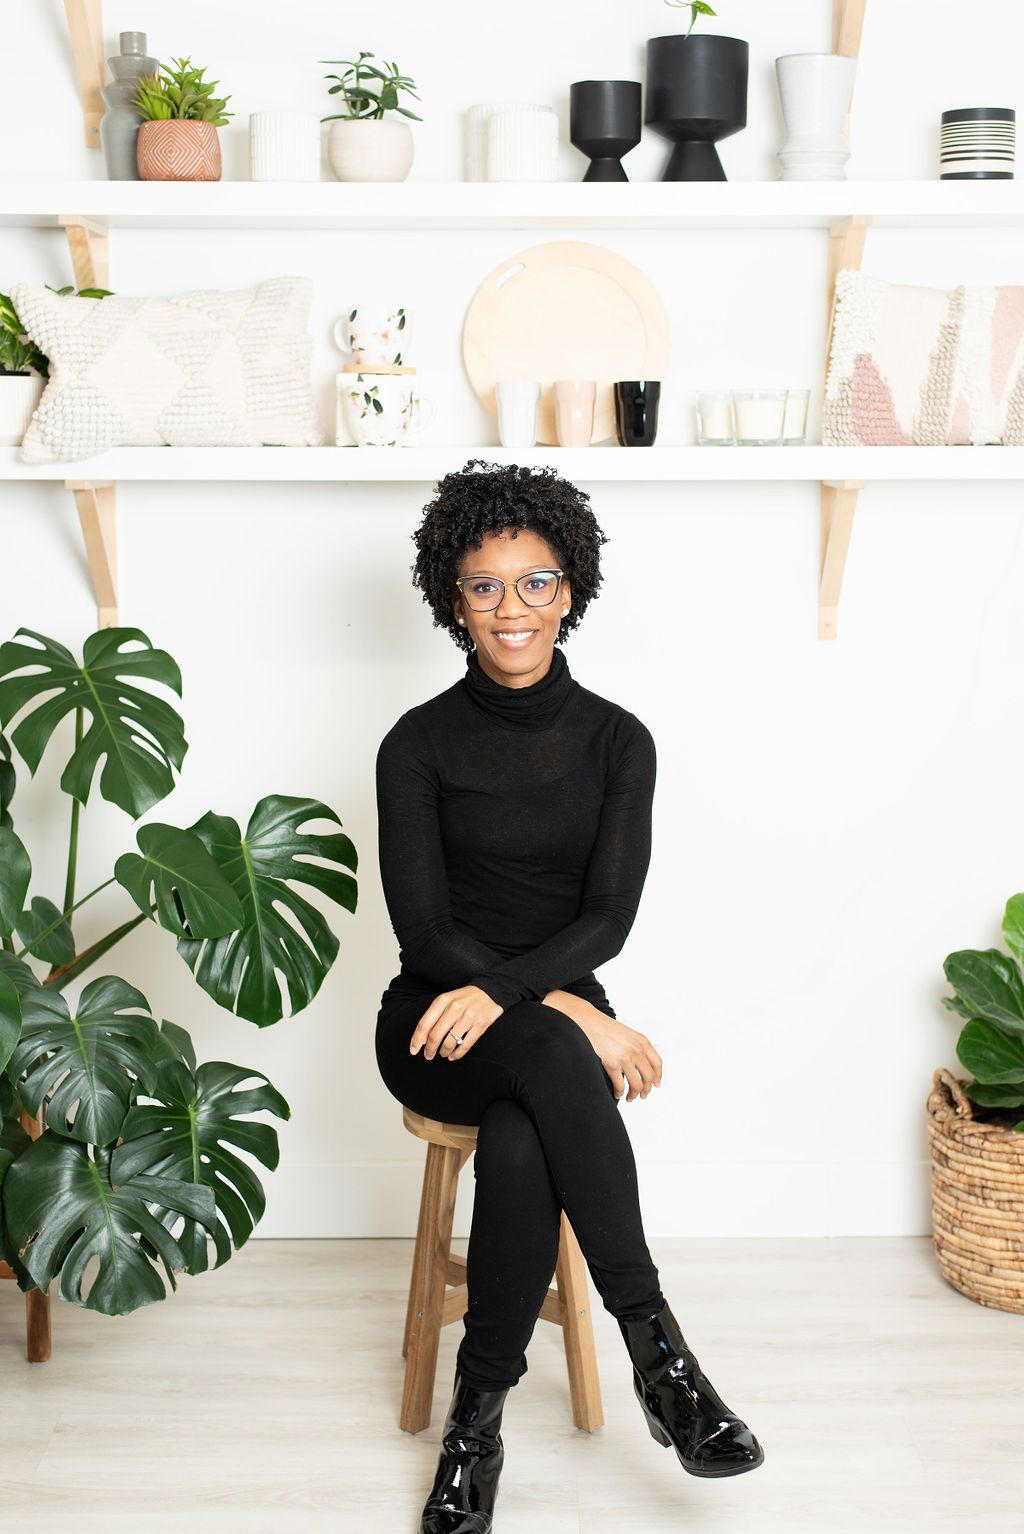 Nickeisha Lewis of Nola Designs sits on a wooden stool in front of shelves displaying homewares